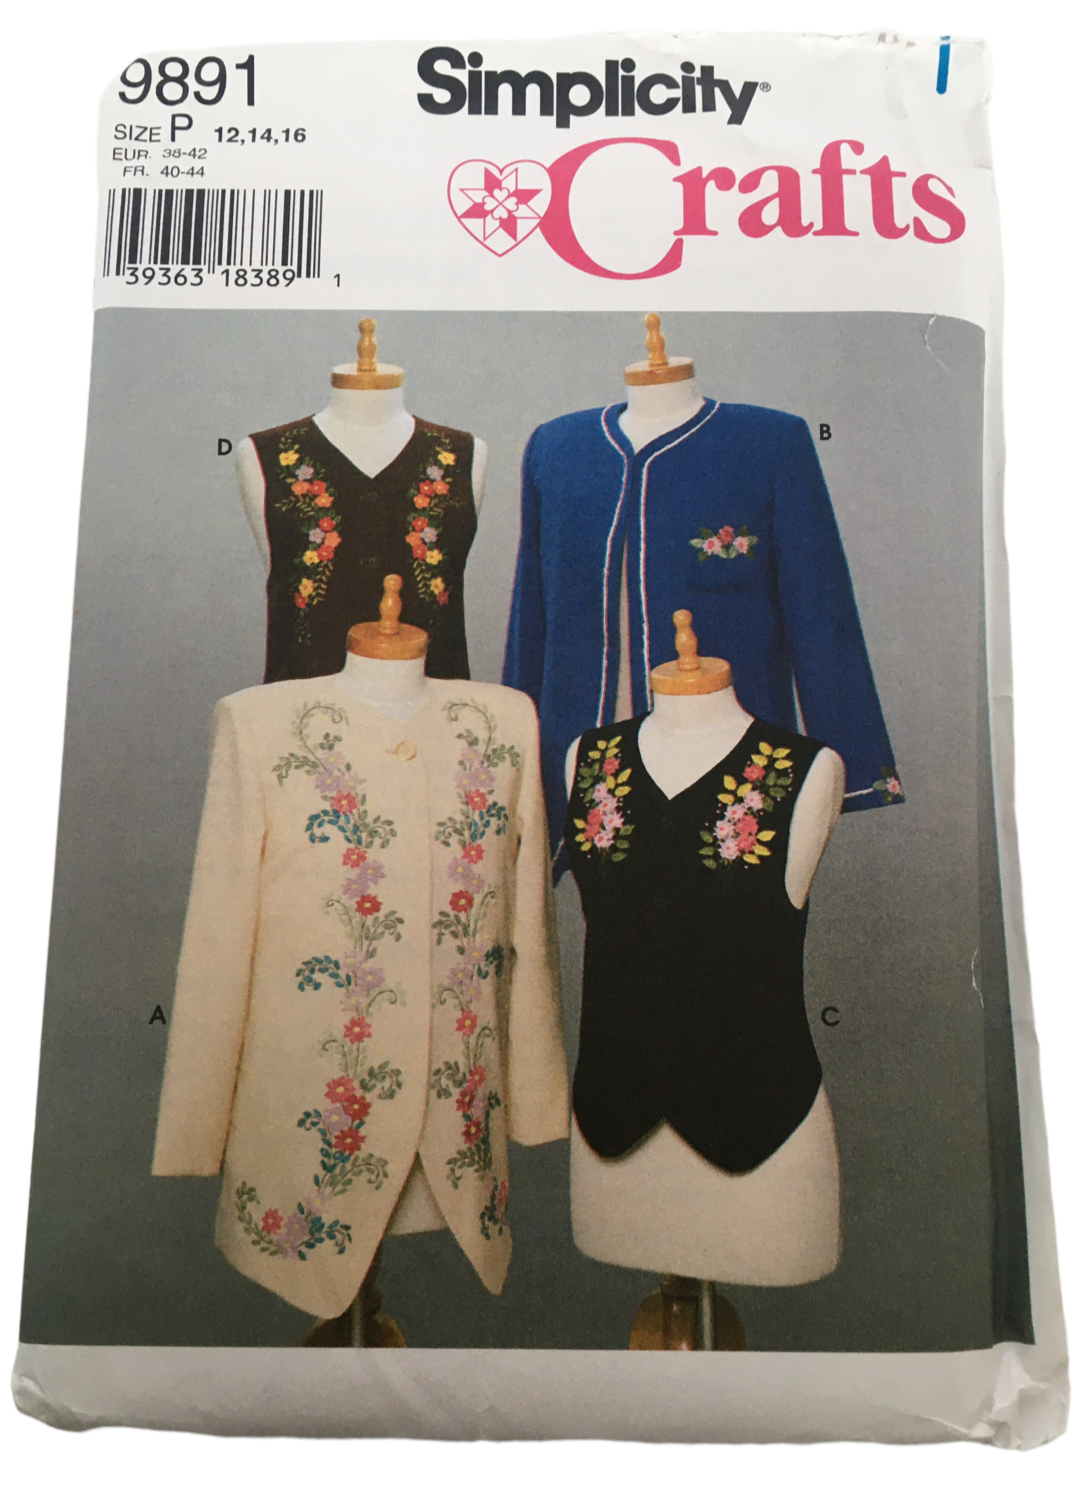 Simplicity Crafts Sewing Pattern 9891 Misses Jackets and Vests Uncut 12 14 16 - $11.99